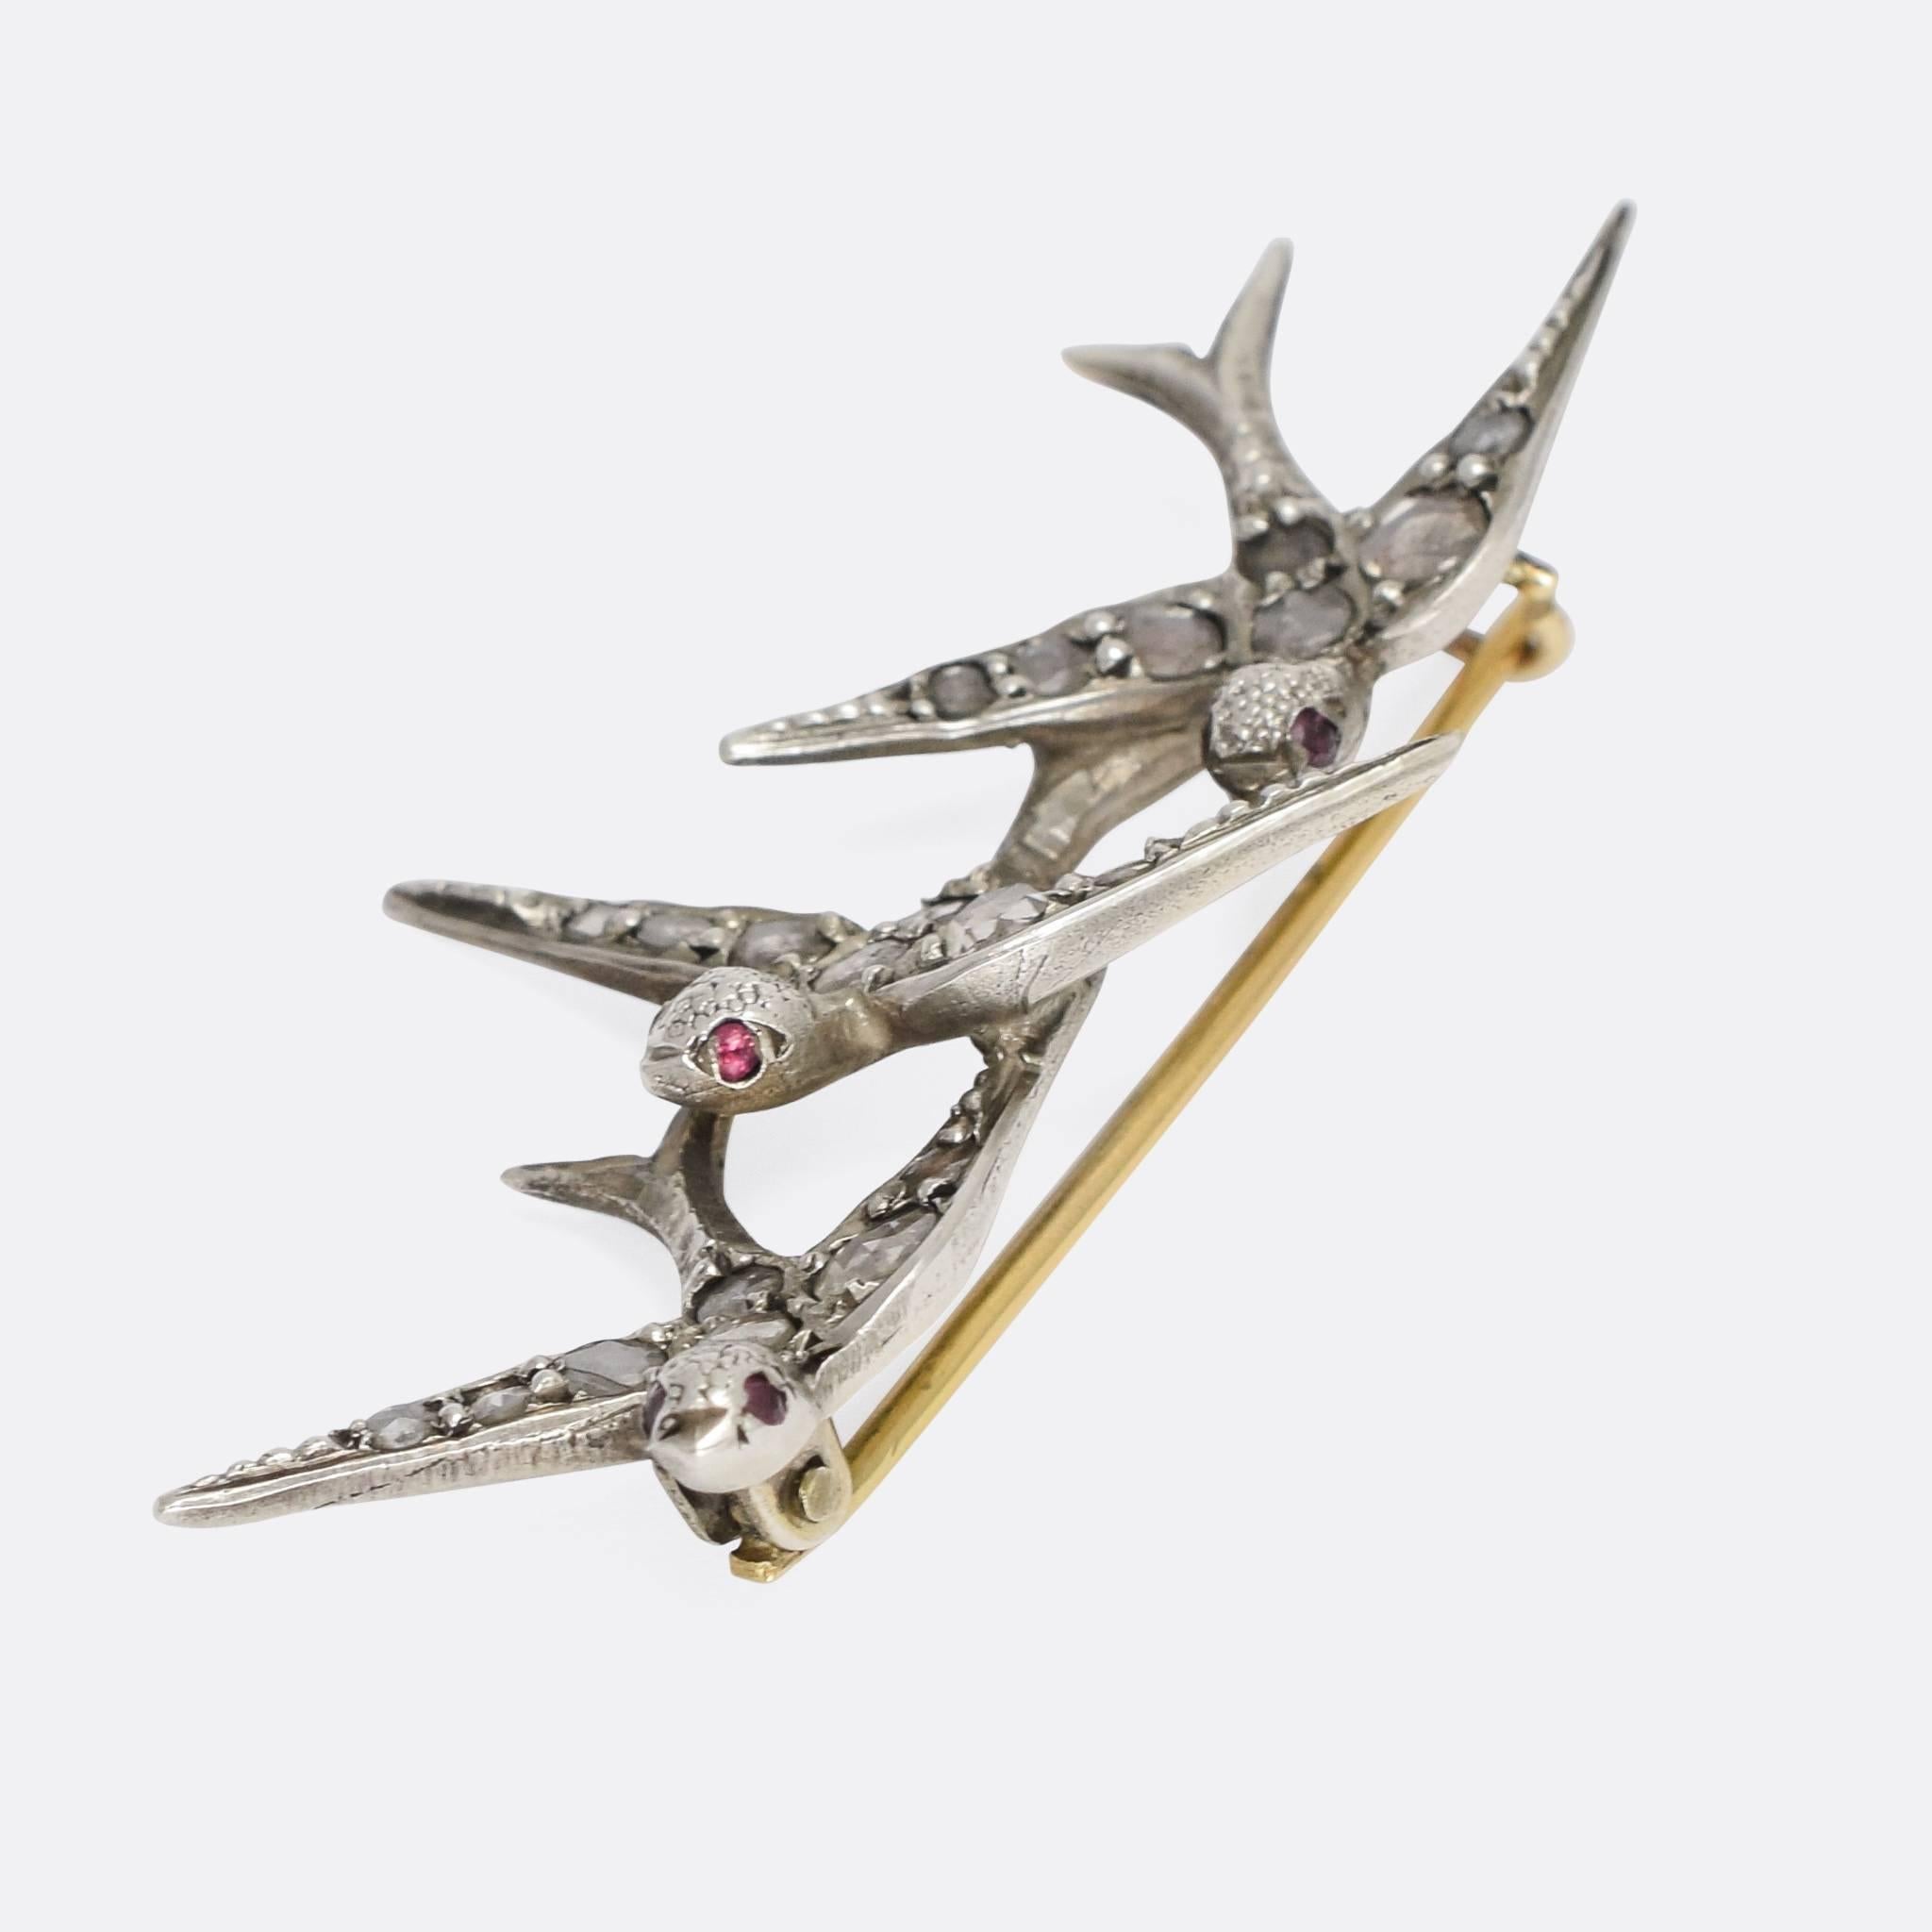 A beautiful antique brooch featuring three swallows set with rose cut diamonds and ruby eyes. The birds have been expertly crafted with lovely detailing and perfectly capturing the motion of flight. The stones are set in silver, with a light gold